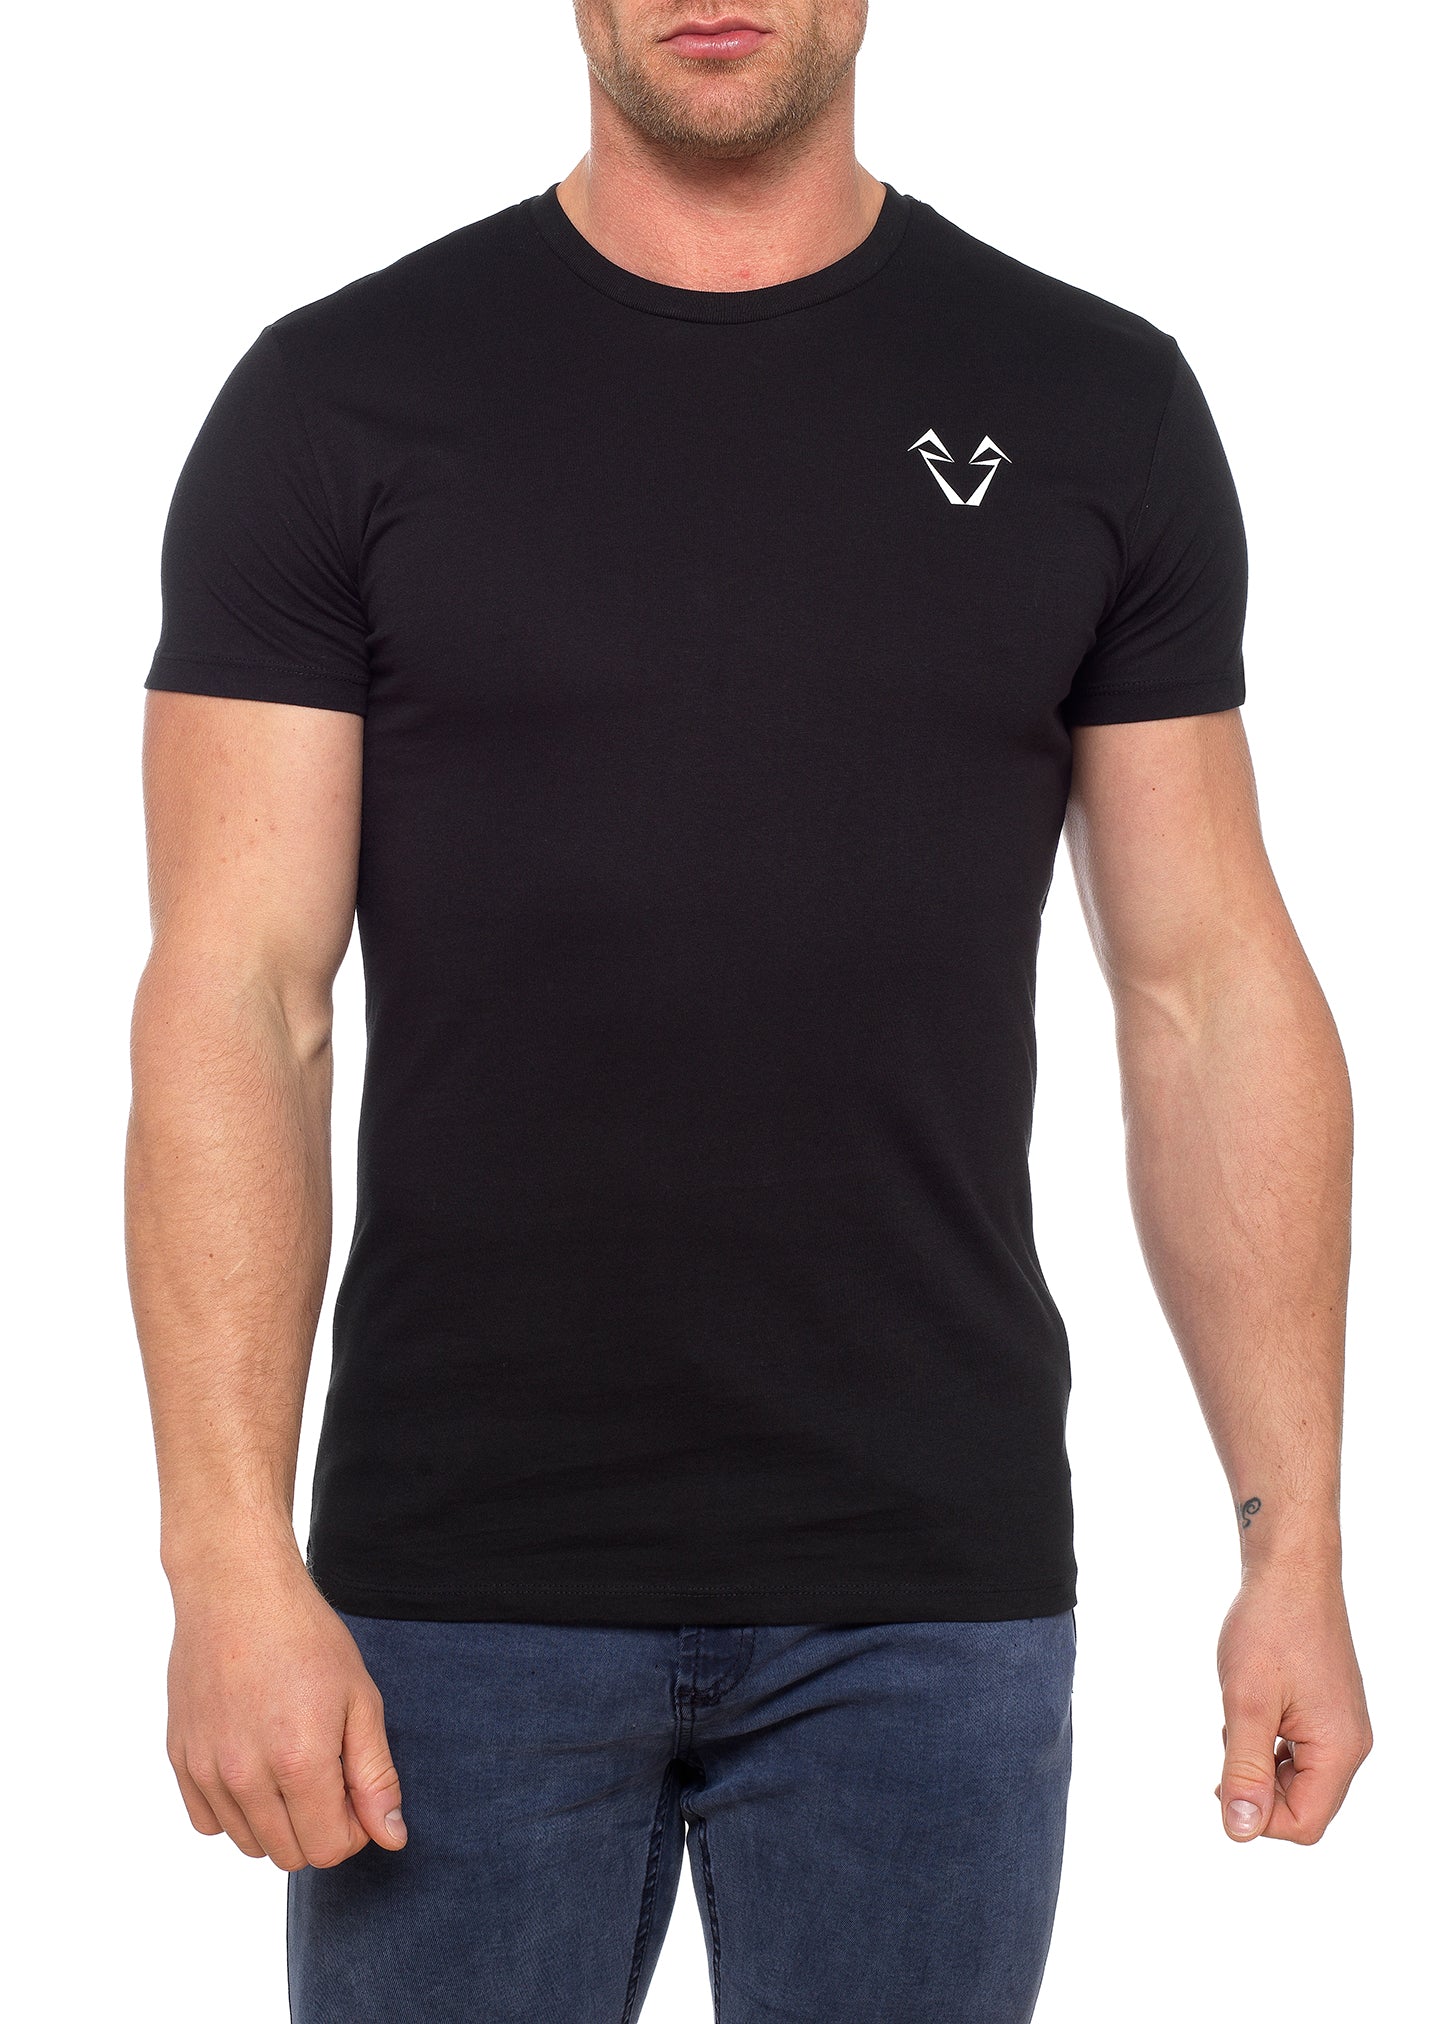 Black Muscle Fit T Shirts